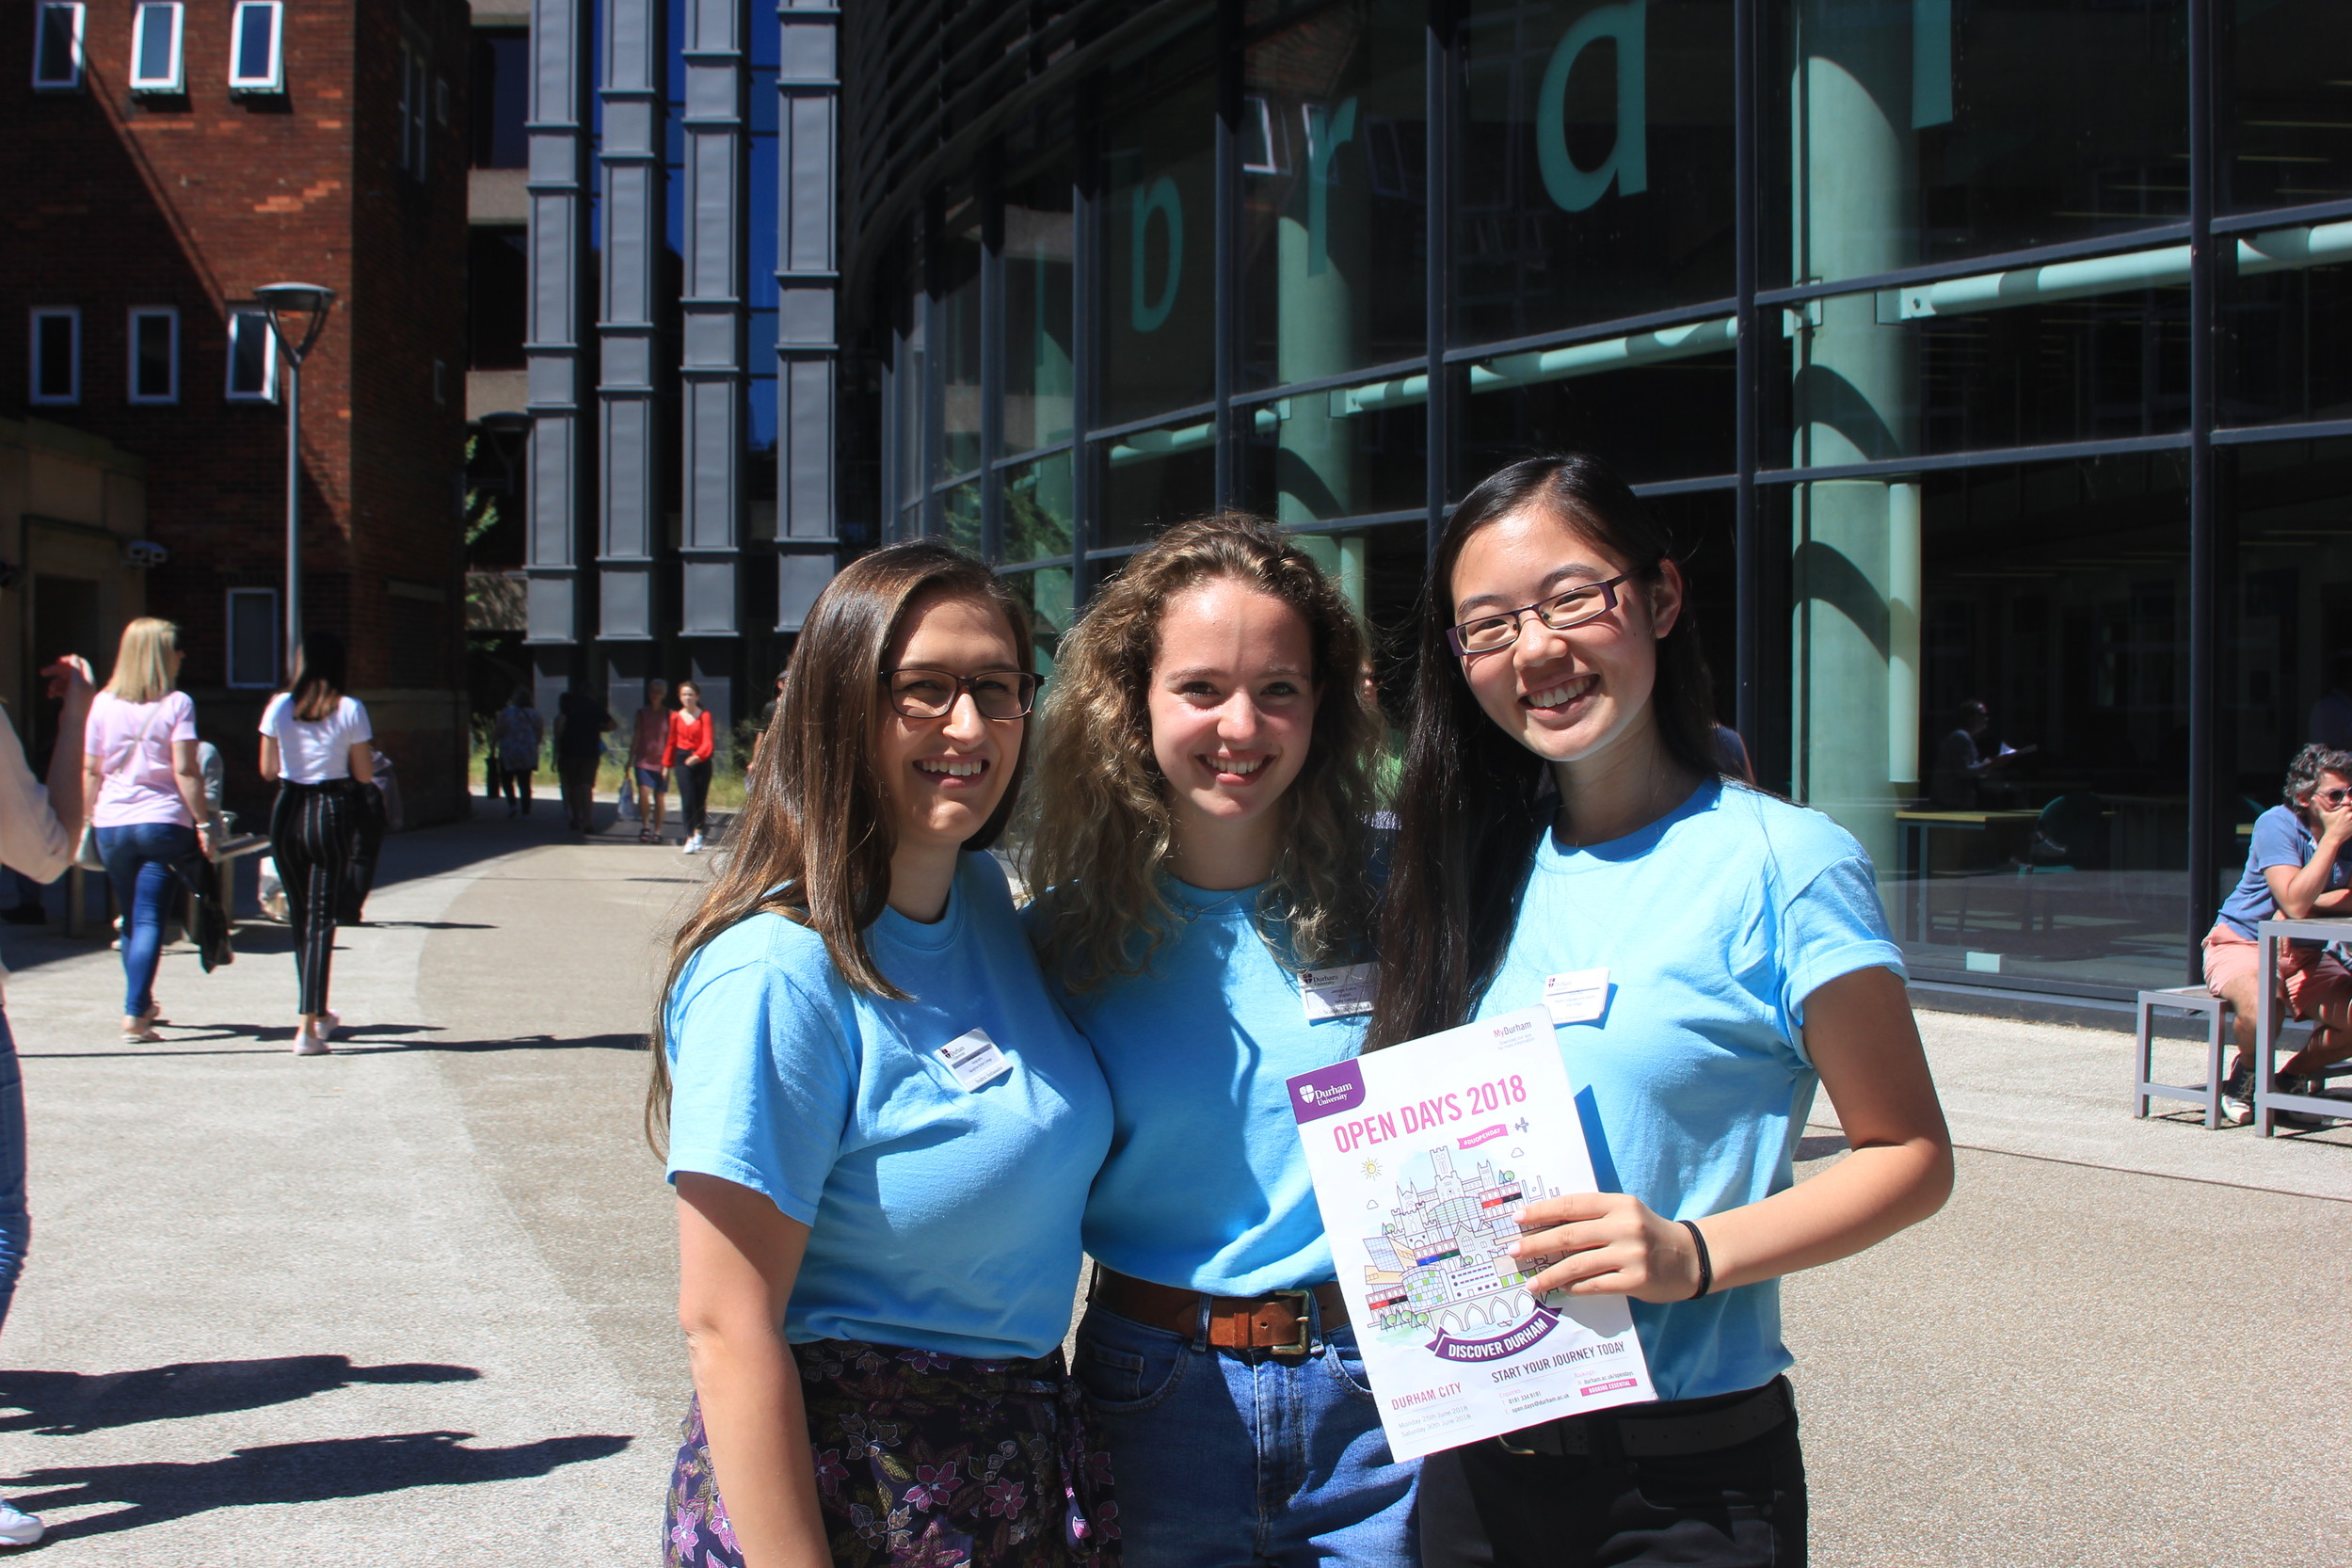 Three students posing and holding an open day brochure